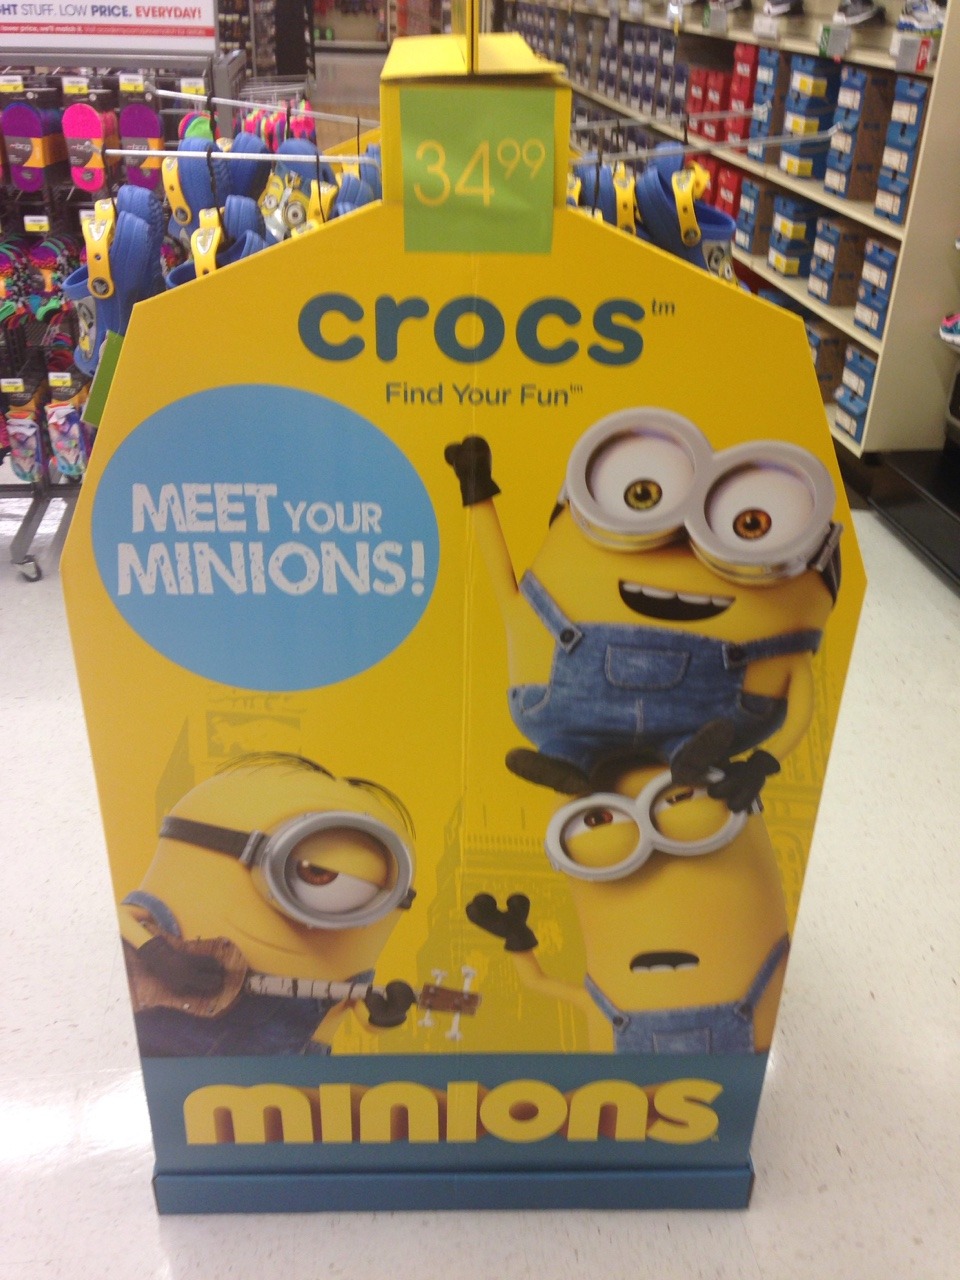 Minions are Terrible - Here's Why 17